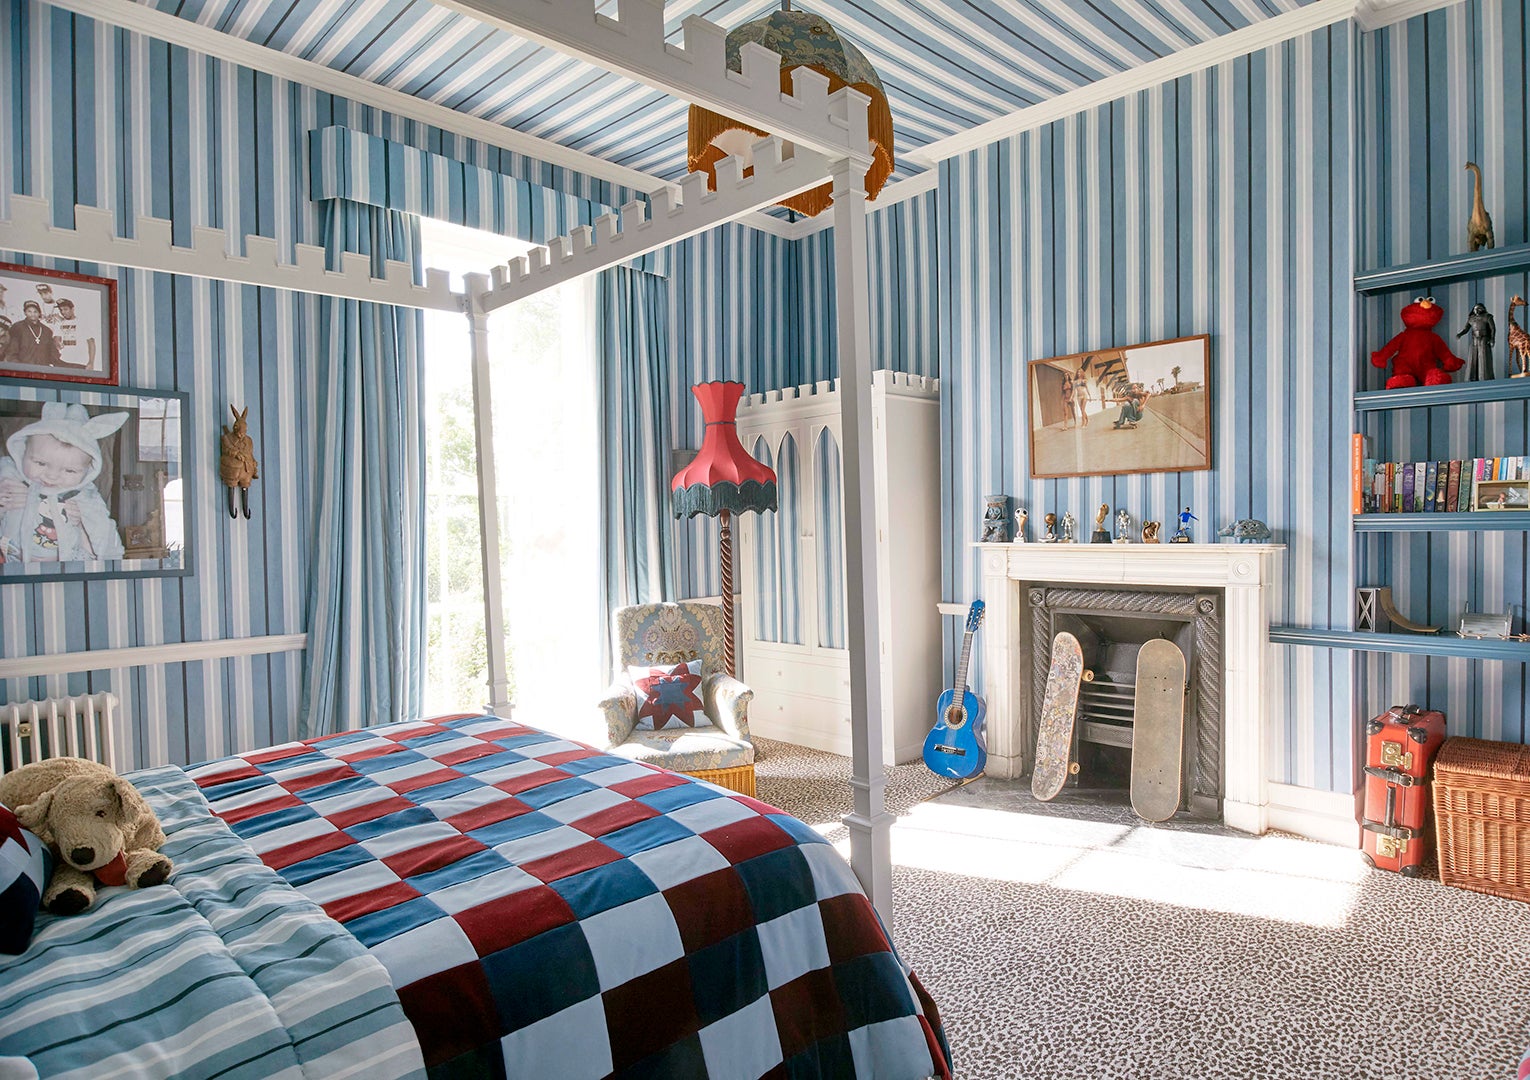 Children's room with blue striped walls.